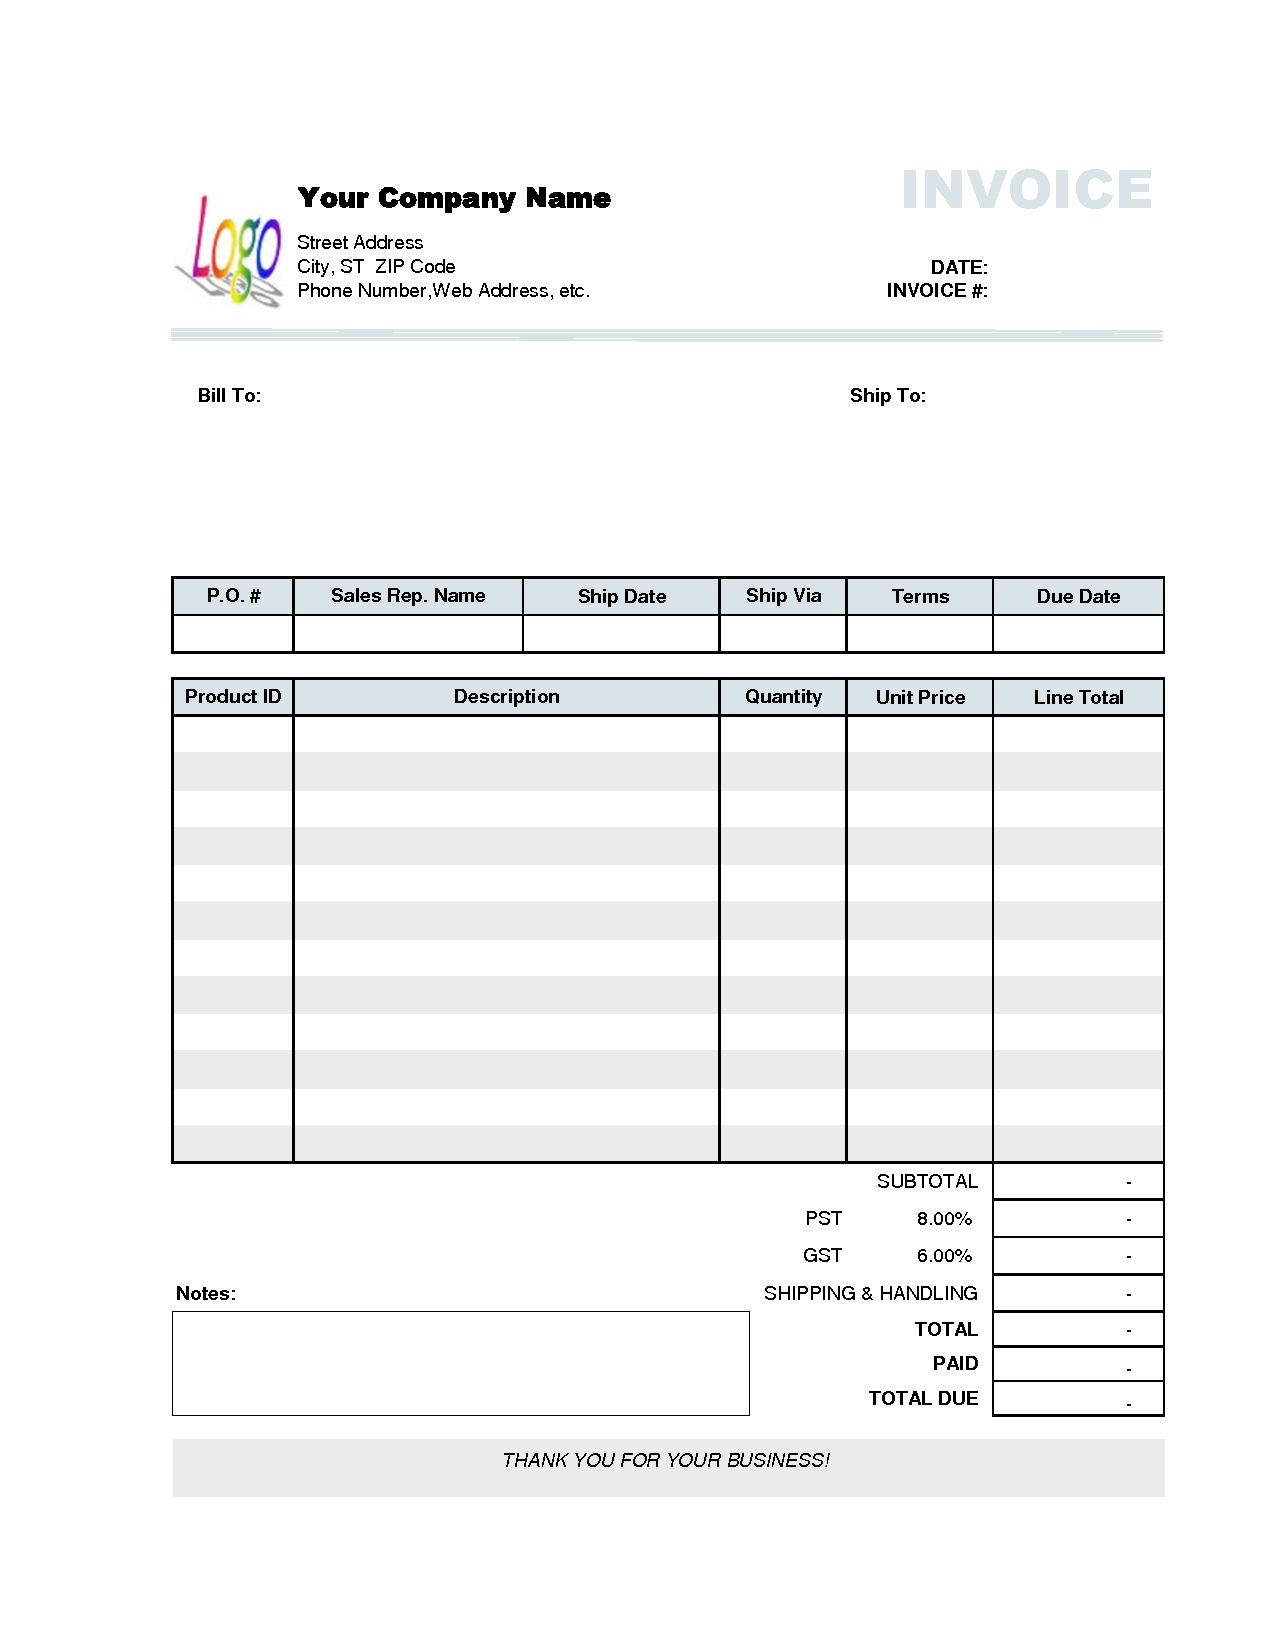 sample invoice kniidvrlistscom samples of an invoice